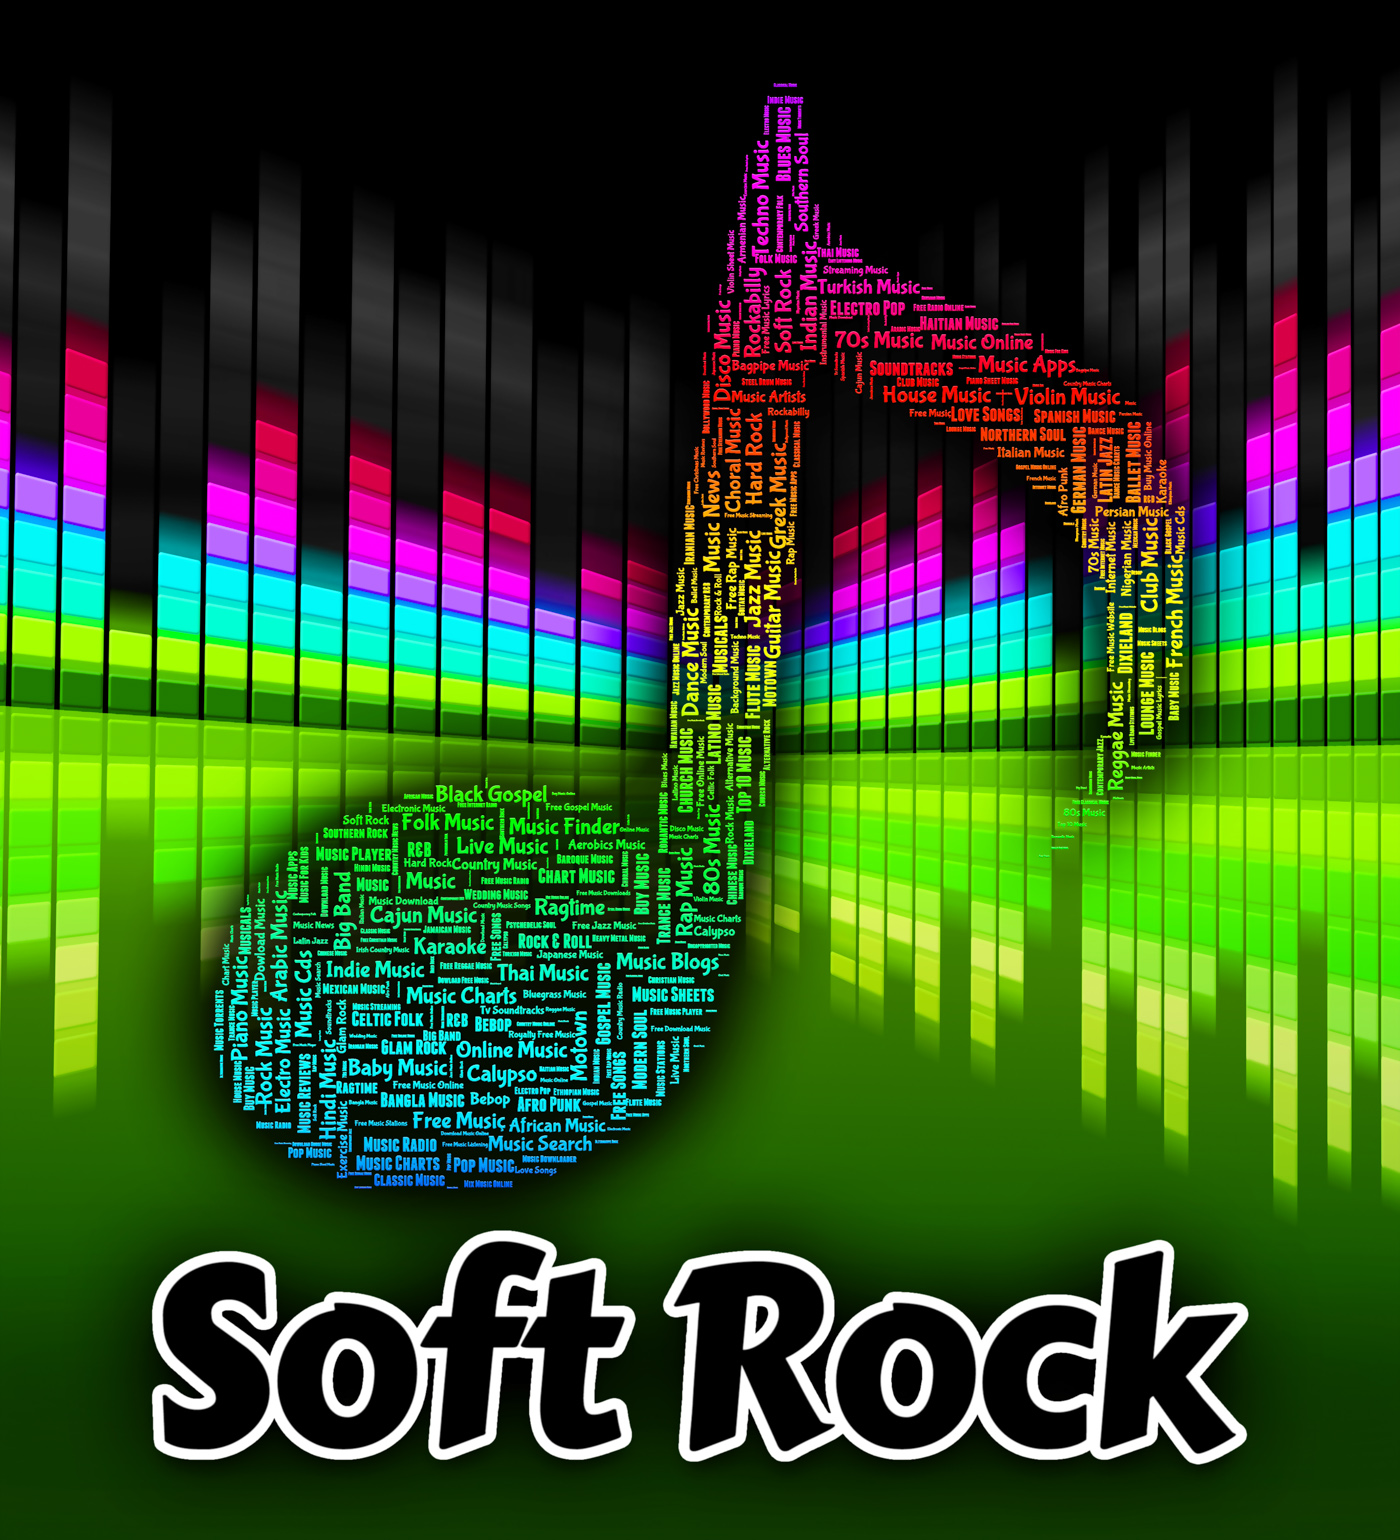 Soft rock means vocal harmonies and acoustic photo